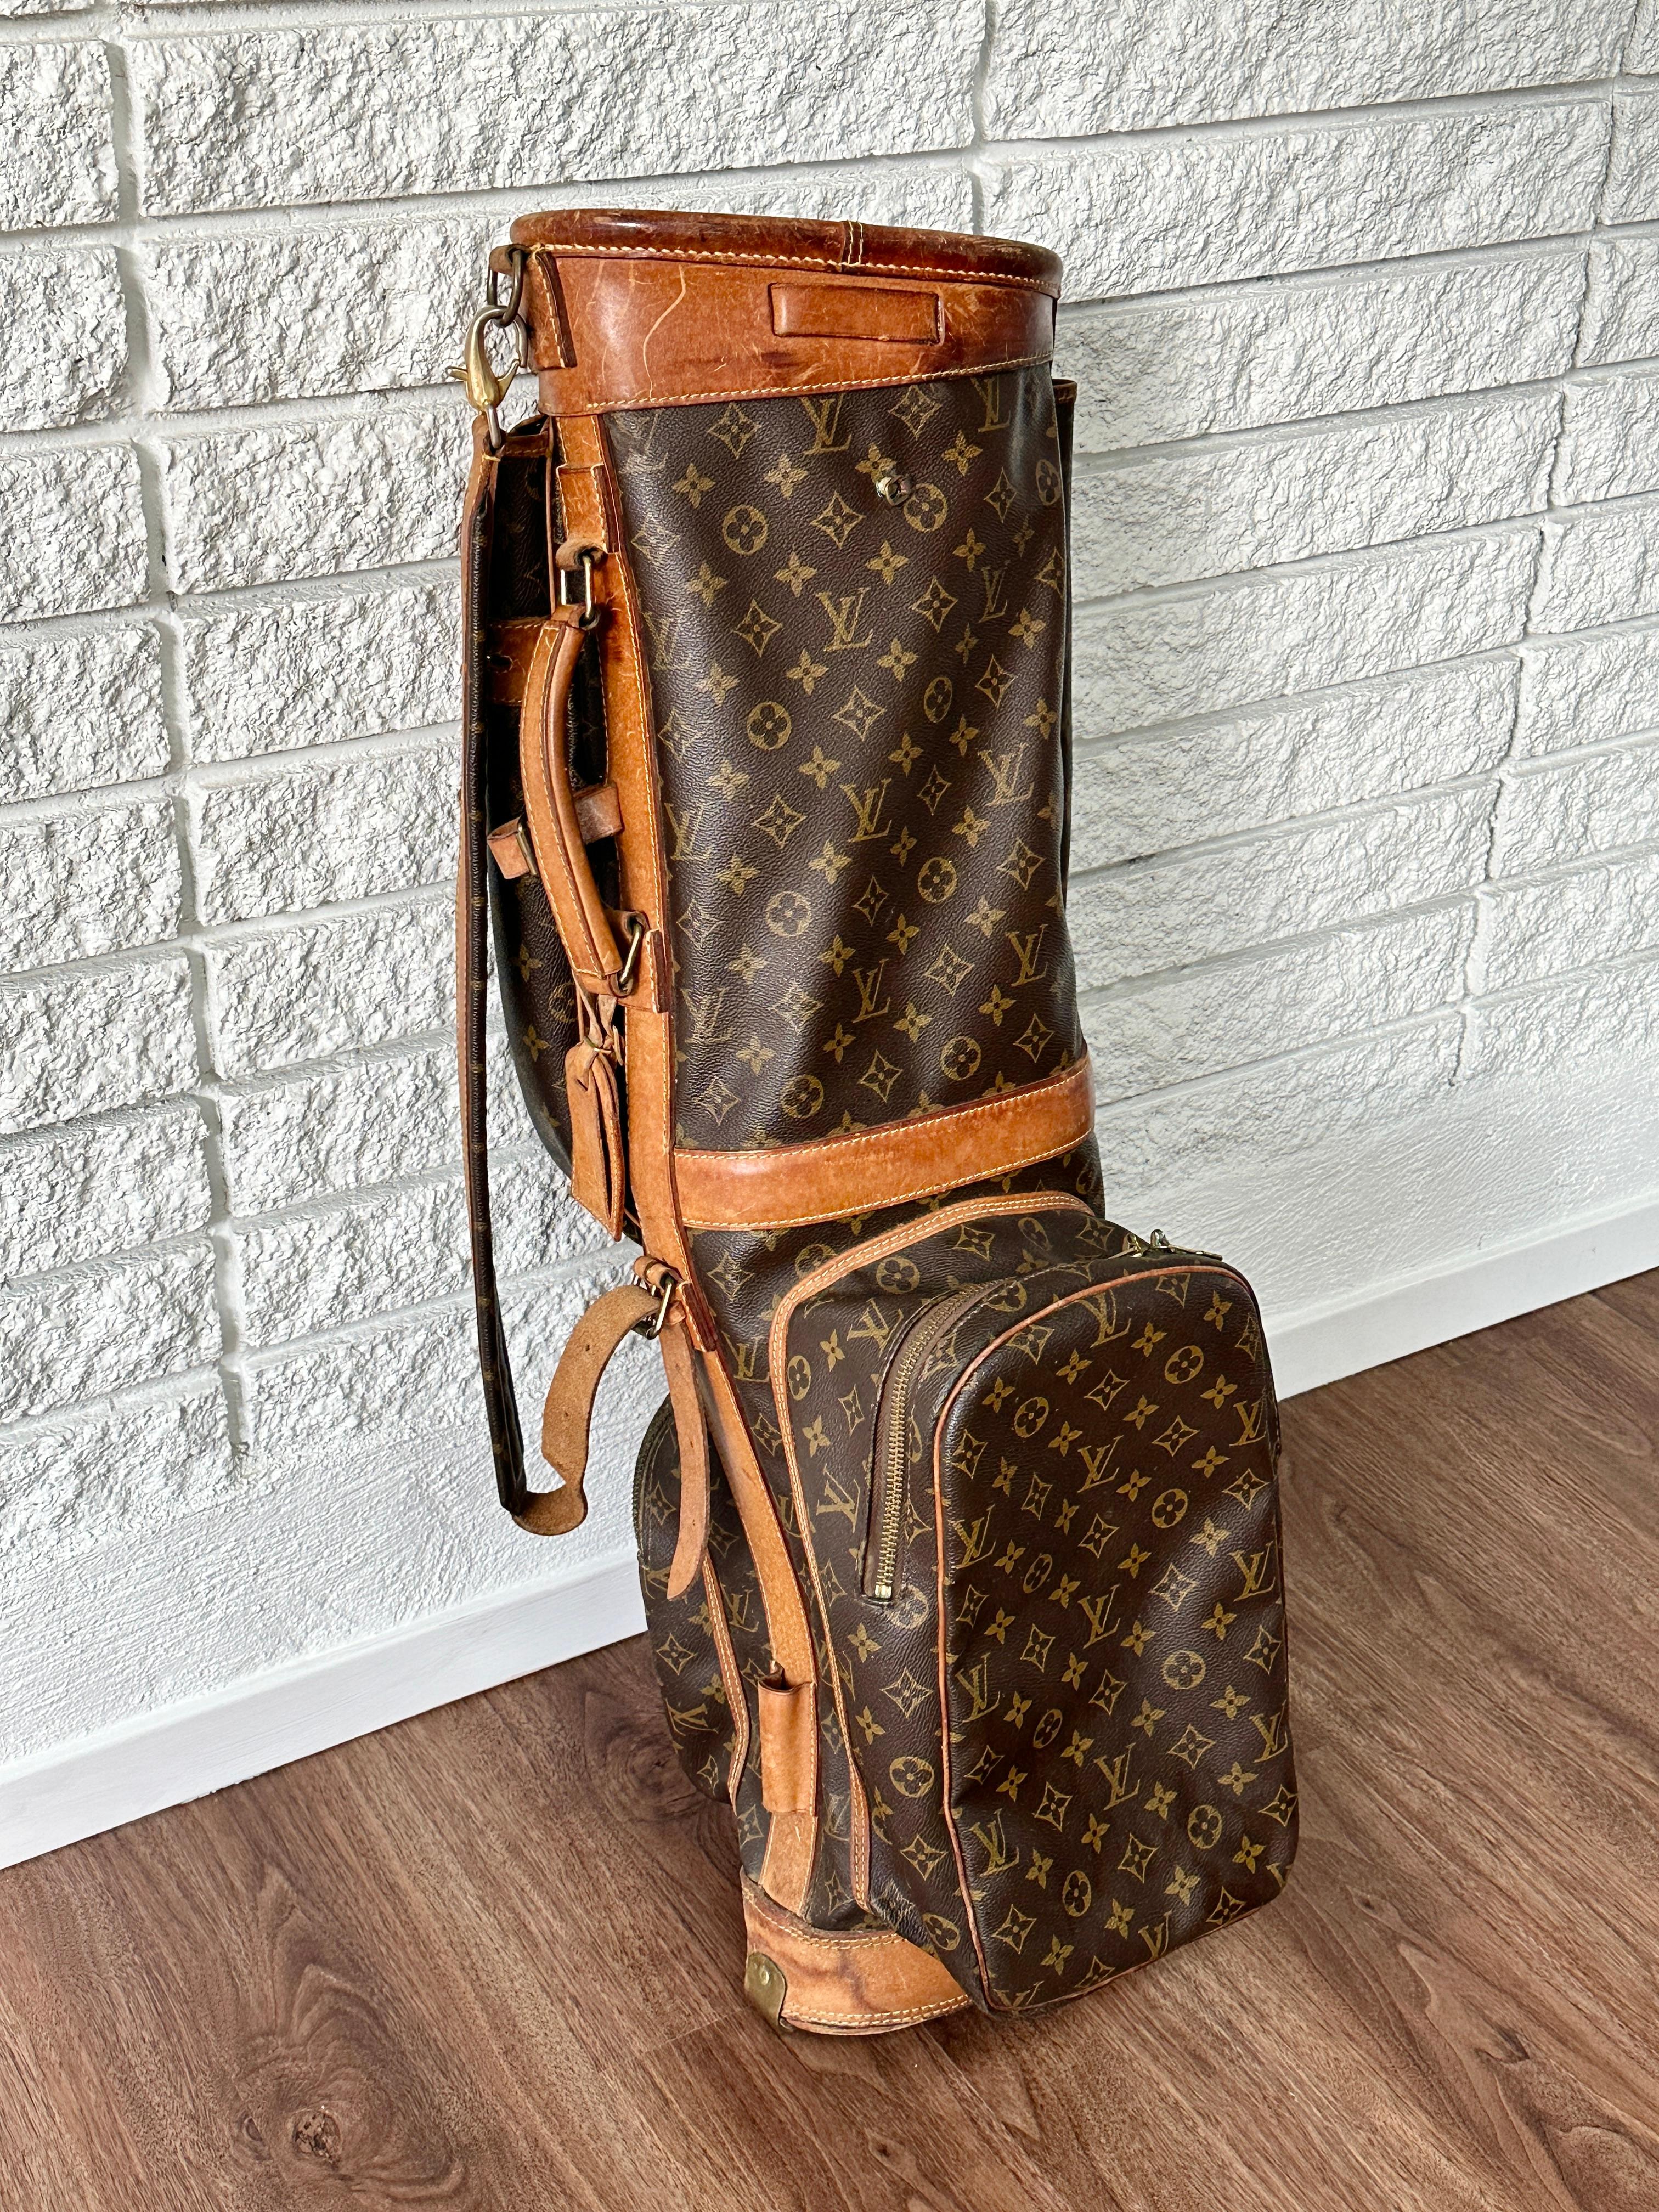 A vintage Louis Vuitton golf bag circa 1960s - 1970s

Beautiful example with nice patina in monogrammed canvas with natural leather trim and shoulder strap
Segmented club storage and three zippered storage compartments, the largest which folds over